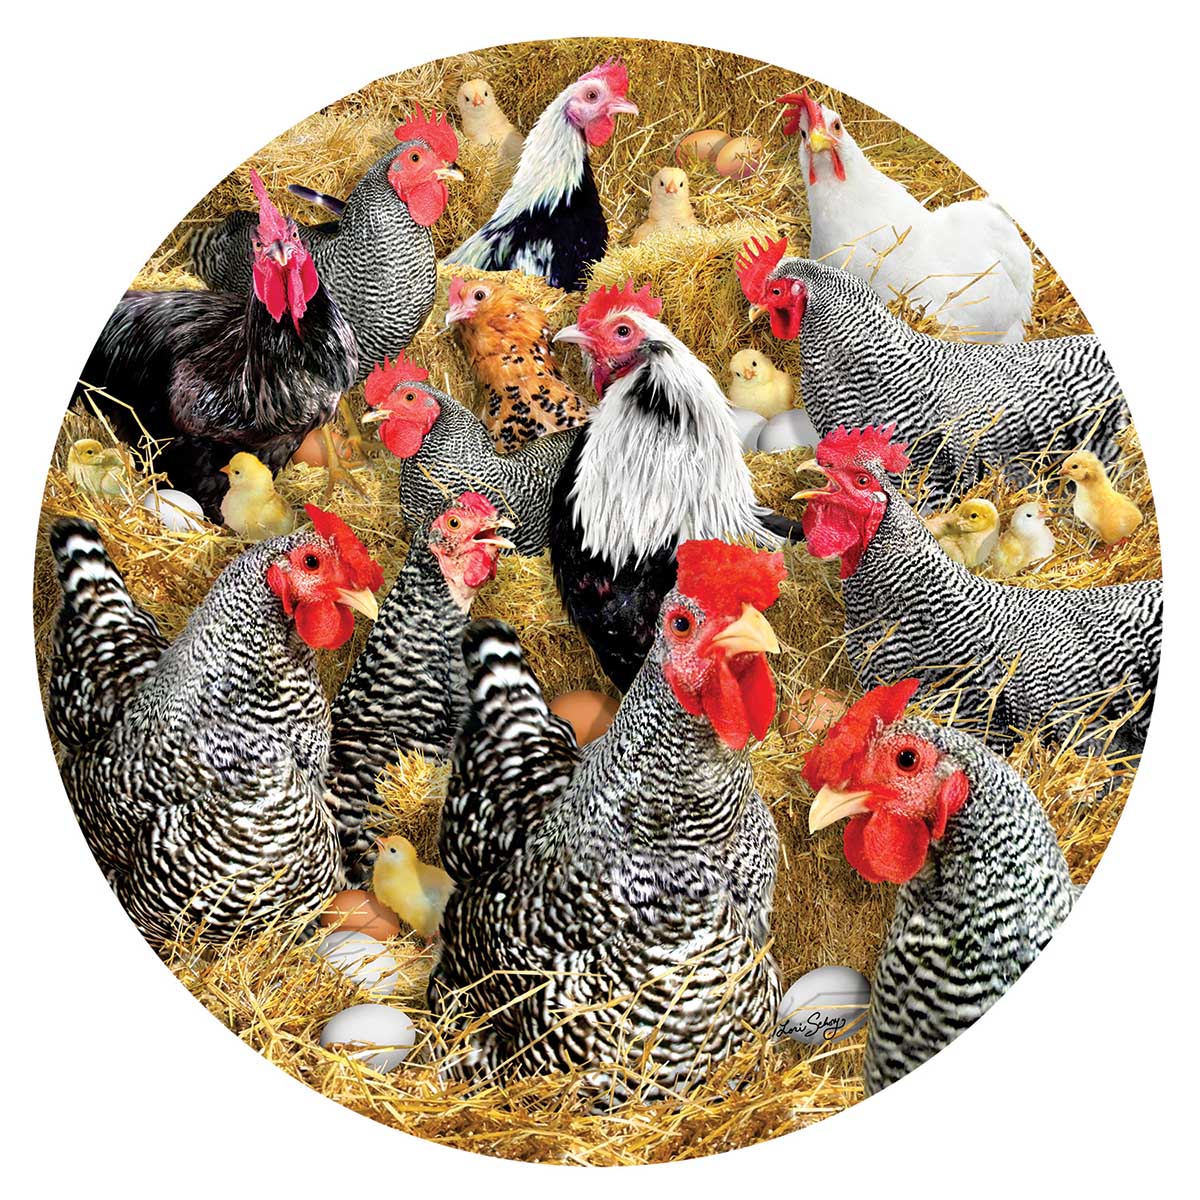 Chickens and Chicks Farm Animal Round Jigsaw Puzzle